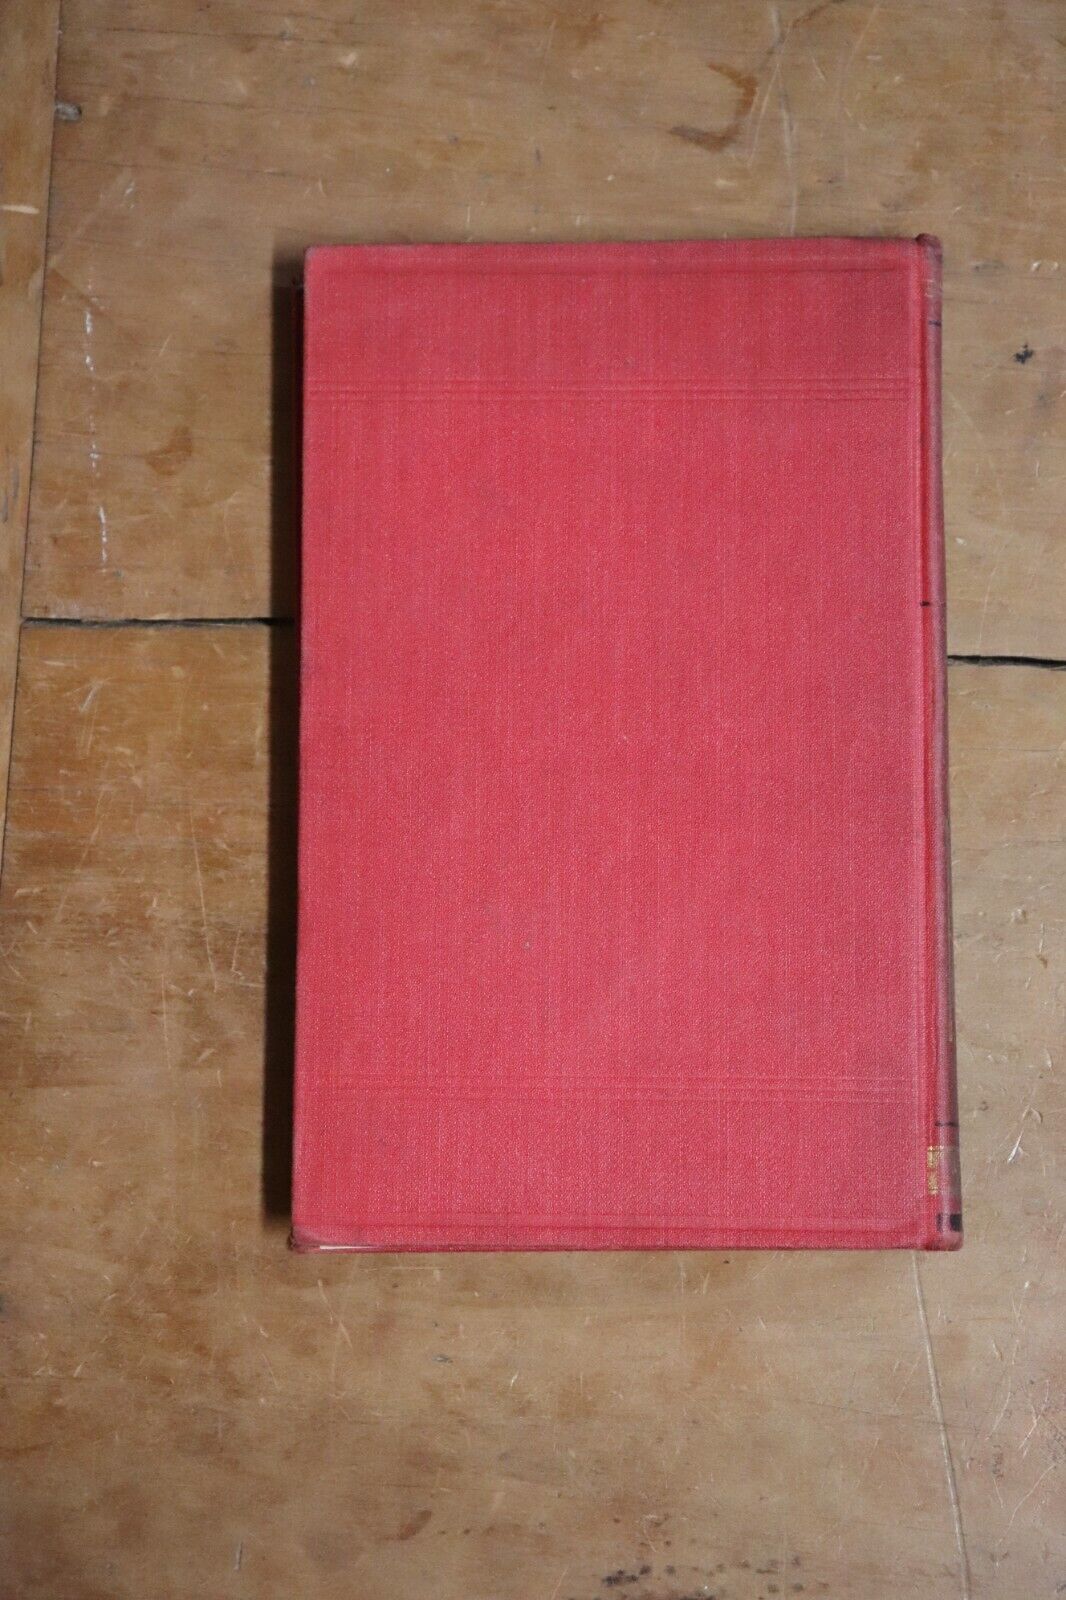 The Fire Protection of Mills - Woodbury USA - 1895 - Scarce Antique Book